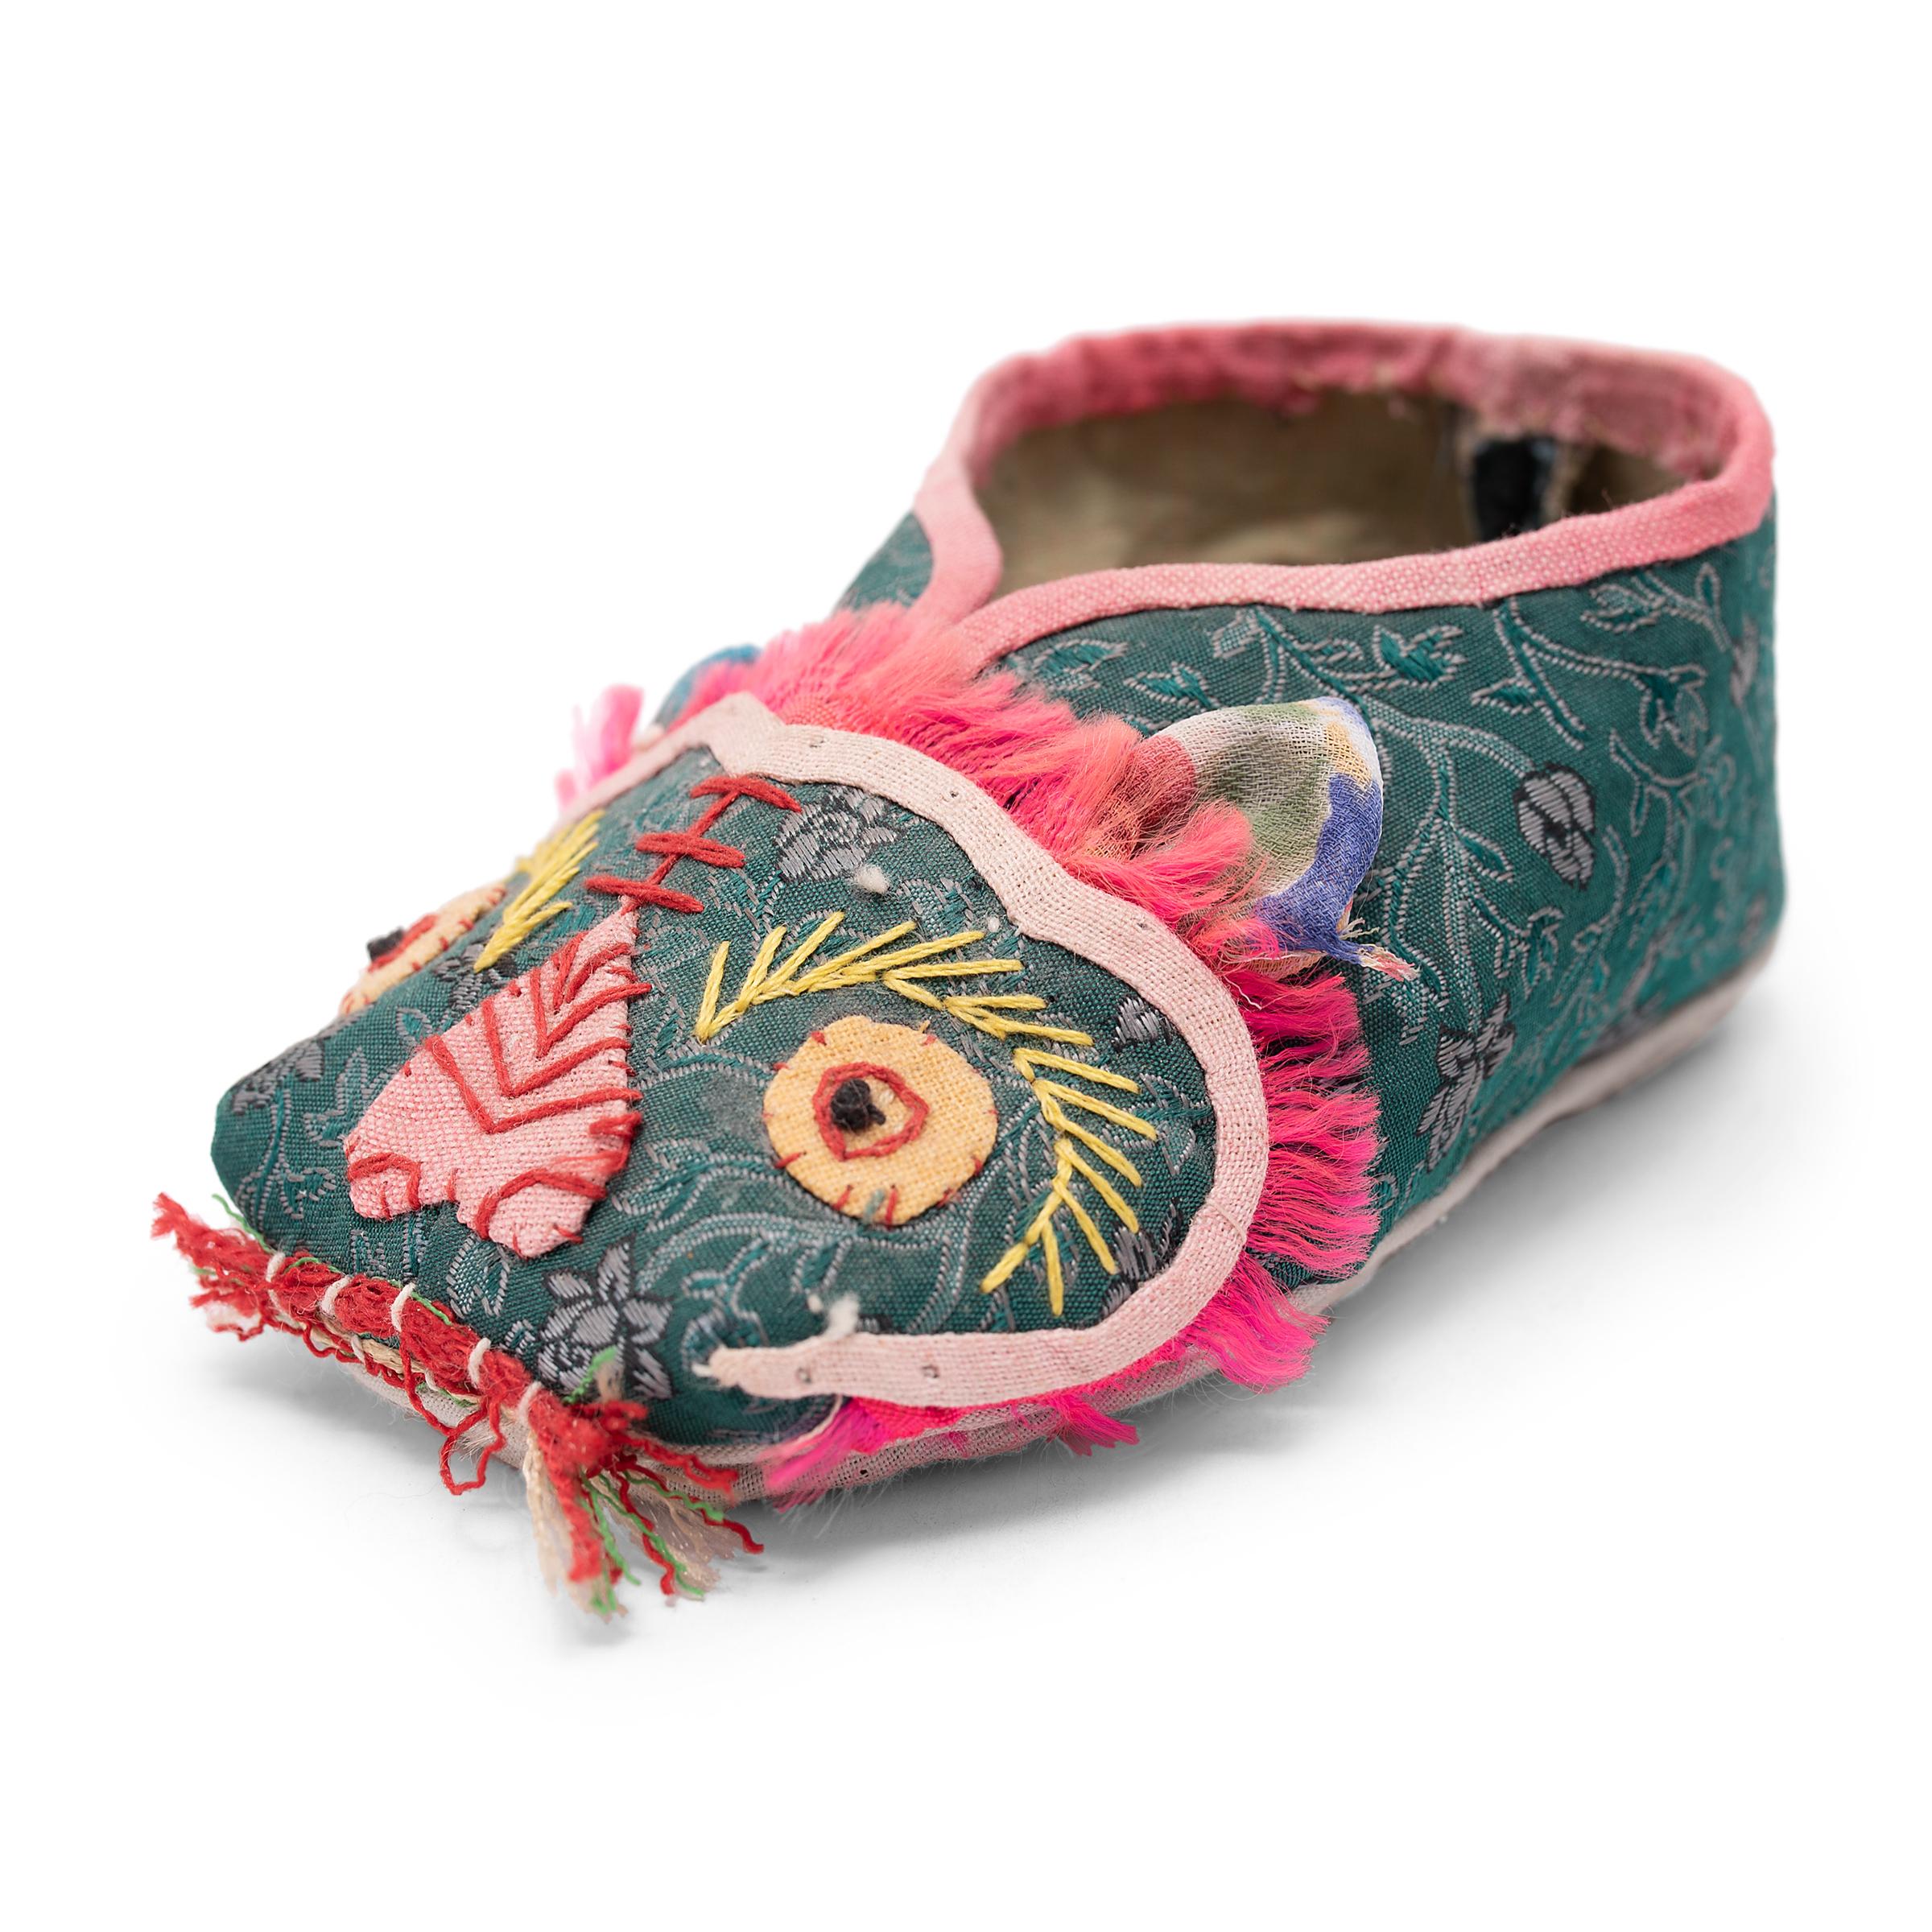 Hand-Crafted Pair of Embroidered Lion Children's Slippers, circa 1920